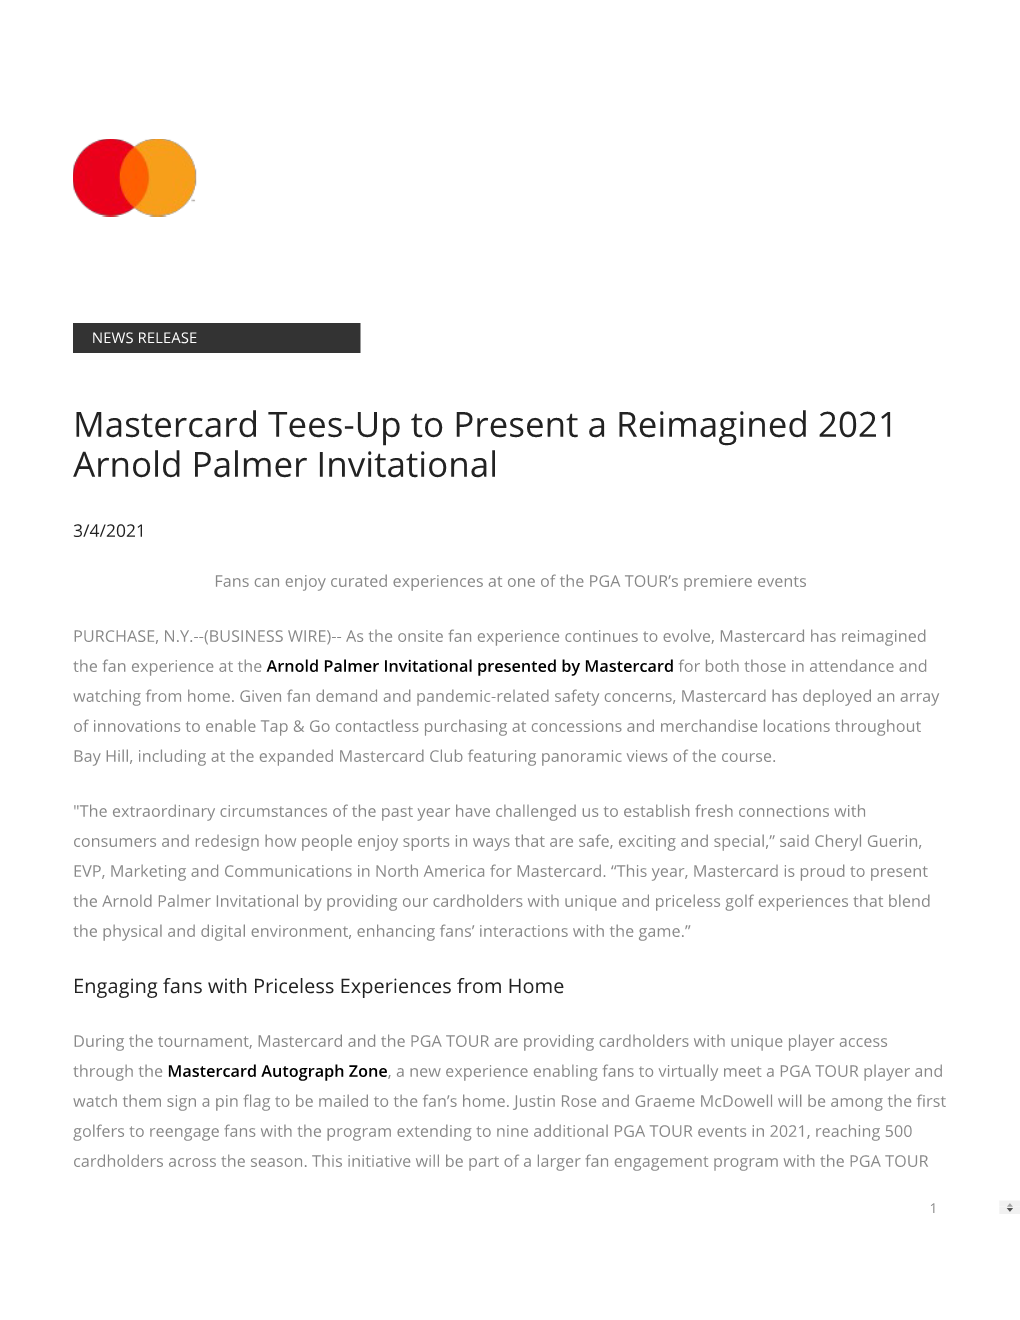 Mastercard Tees-Up to Present a Reimagined 2021 Arnold Palmer Invitational